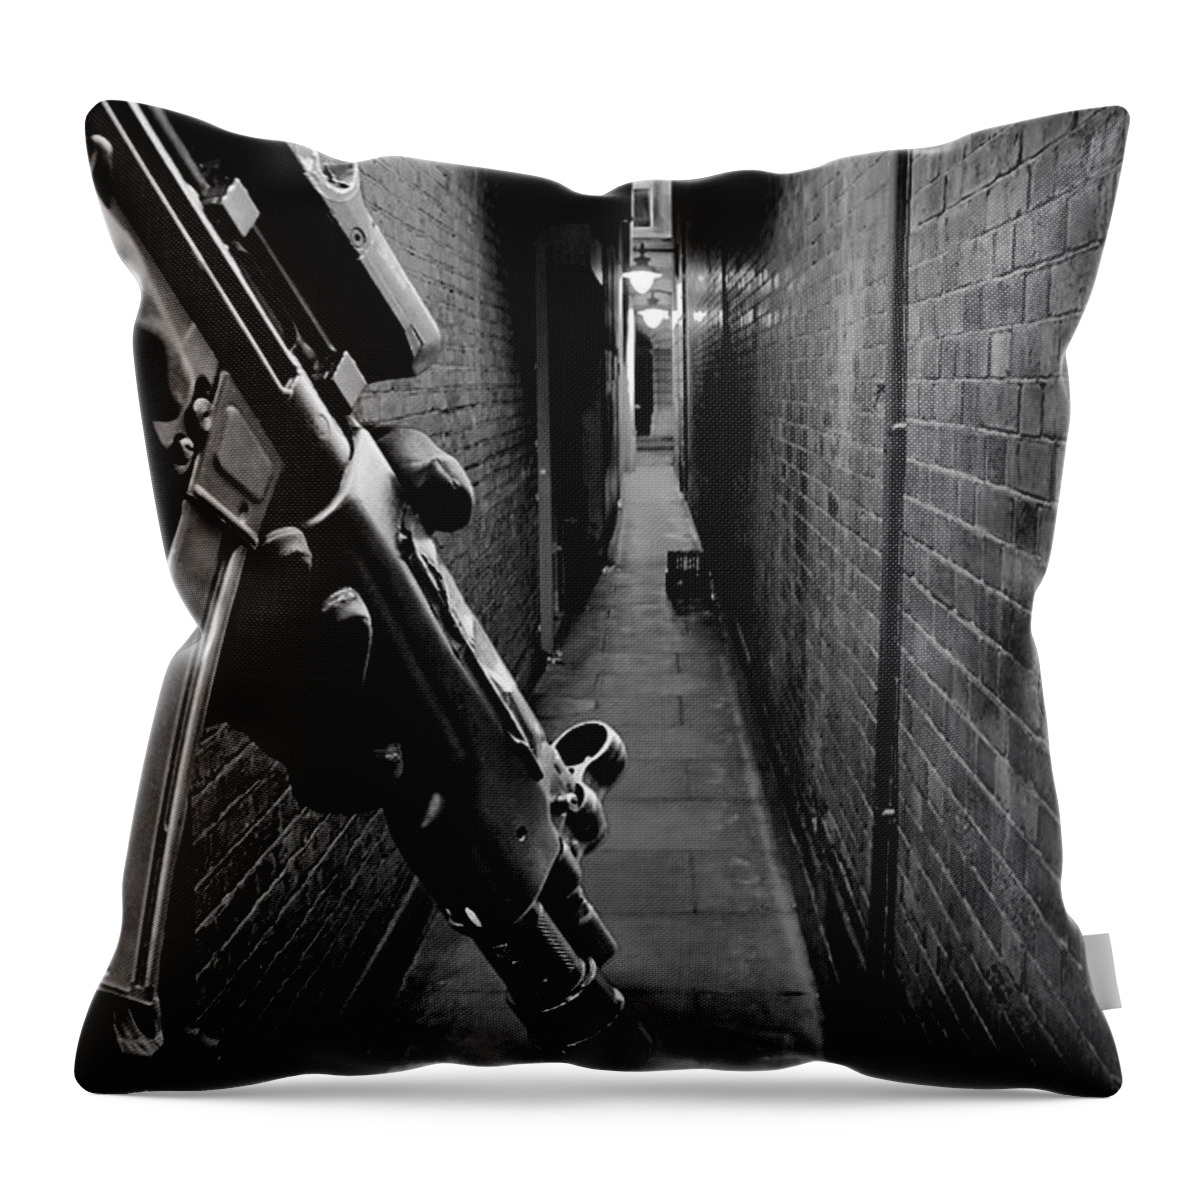 Machine Gun Throw Pillow featuring the photograph The Search is On by Jasna Buncic